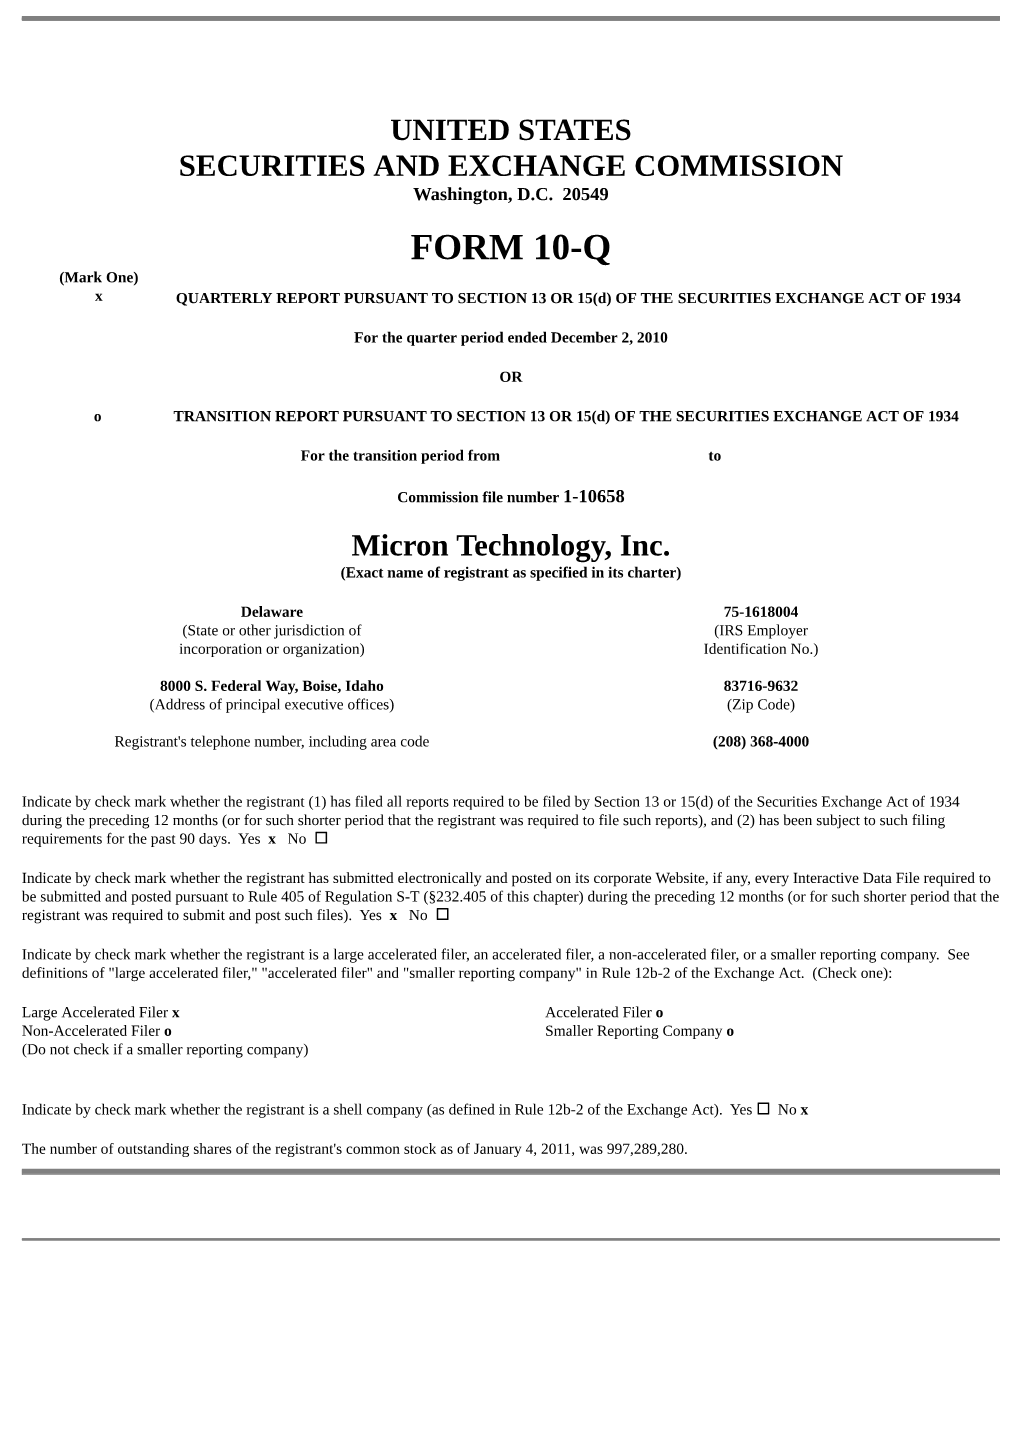 FORM 10-Q (Mark One) X QUARTERLY REPORT PURSUANT to SECTION 13 OR 15(D) of the SECURITIES EXCHANGE ACT of 1934